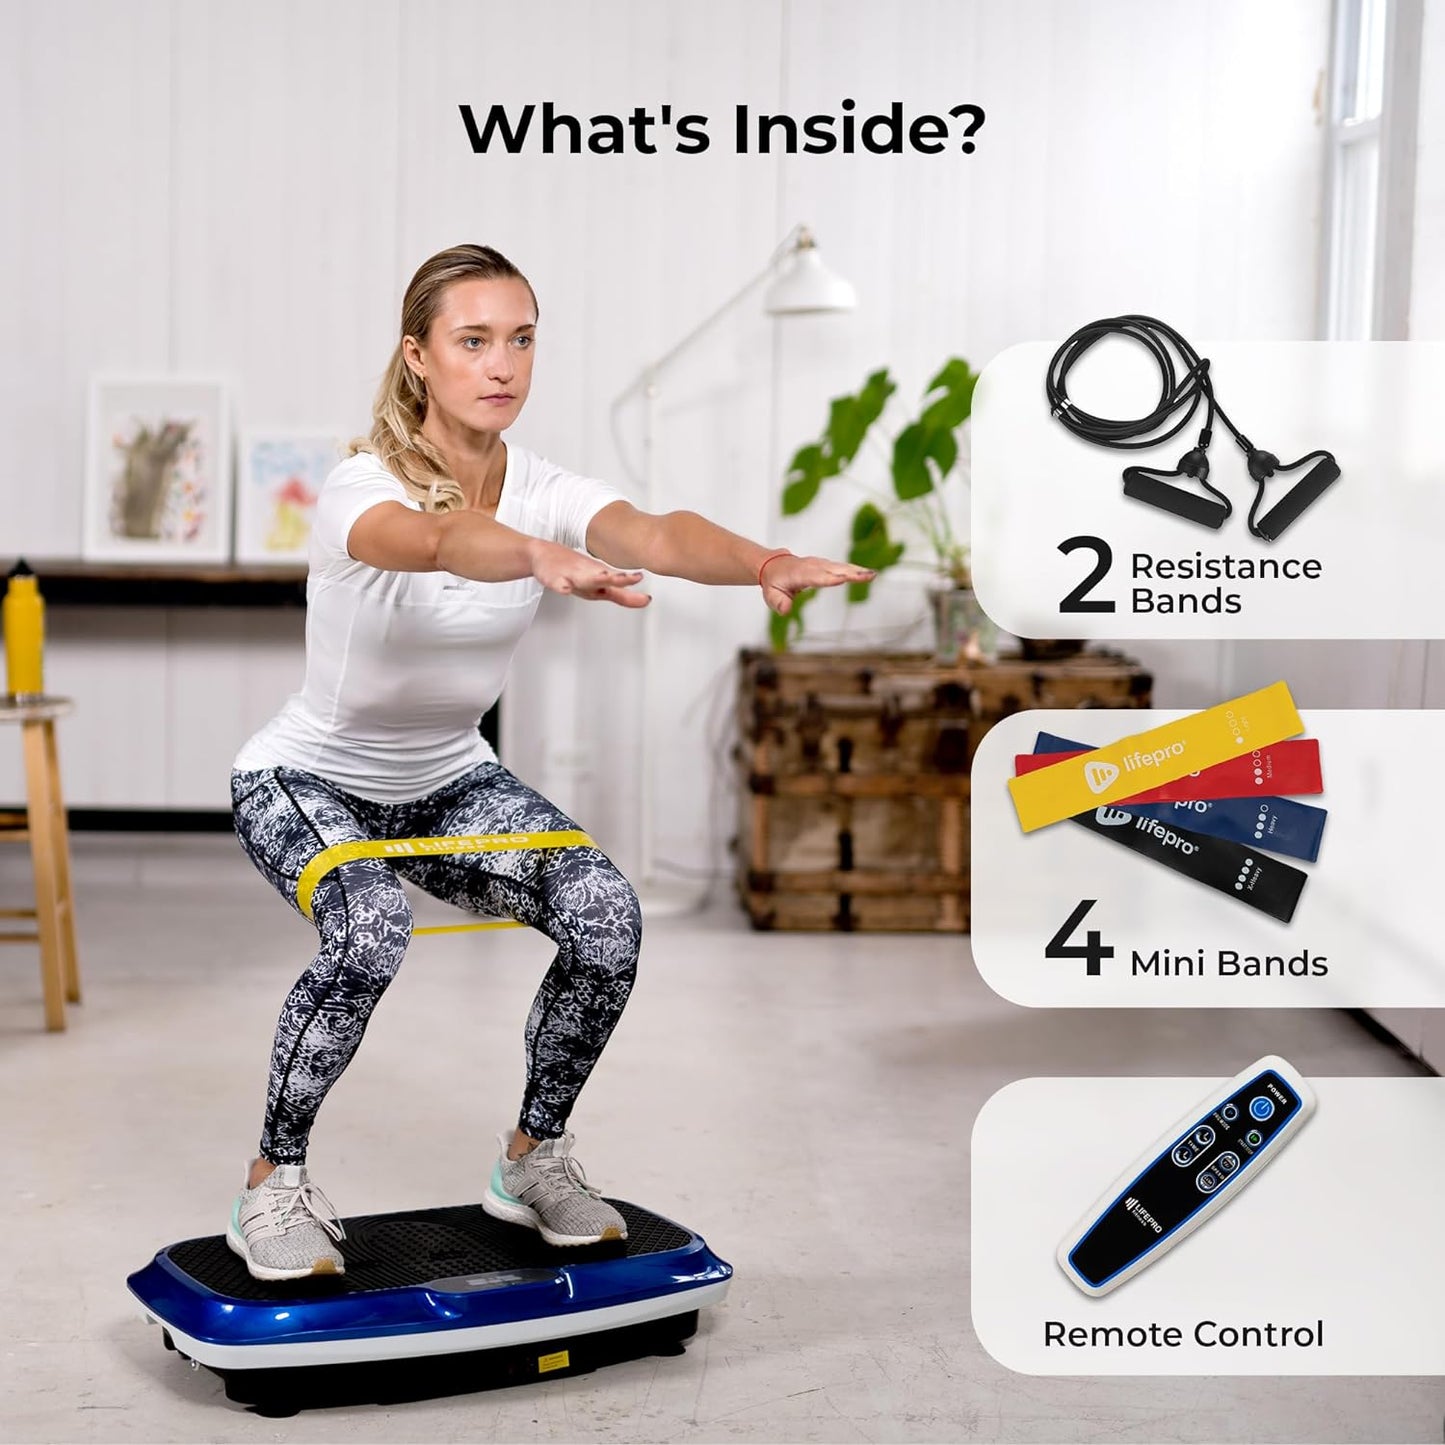 Vibration Plate Exercise Machine Silver- Whole Body Workout Vibration Fitness Platform W/ Loop Bands - Home Training Equipment - Remote, Balance Straps, Videos & Manual